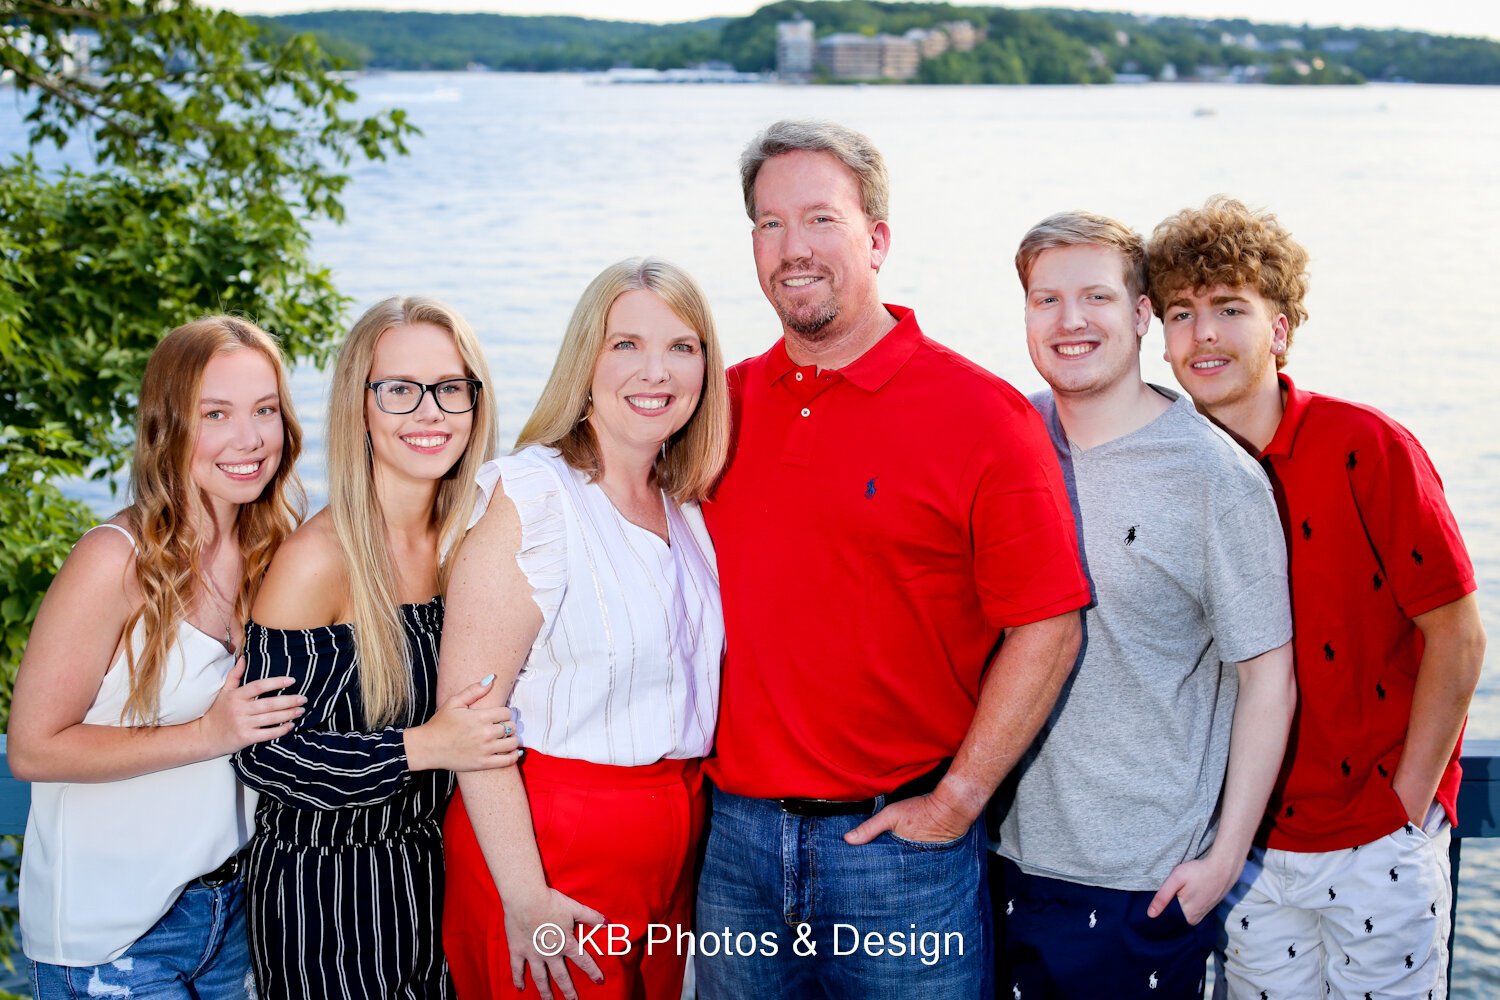 Family+Photography+Lake+of+the+Ozarks+Missouri+relaxed+sunset+dock+photos+KB+Photos+and+Design+(2).JPG